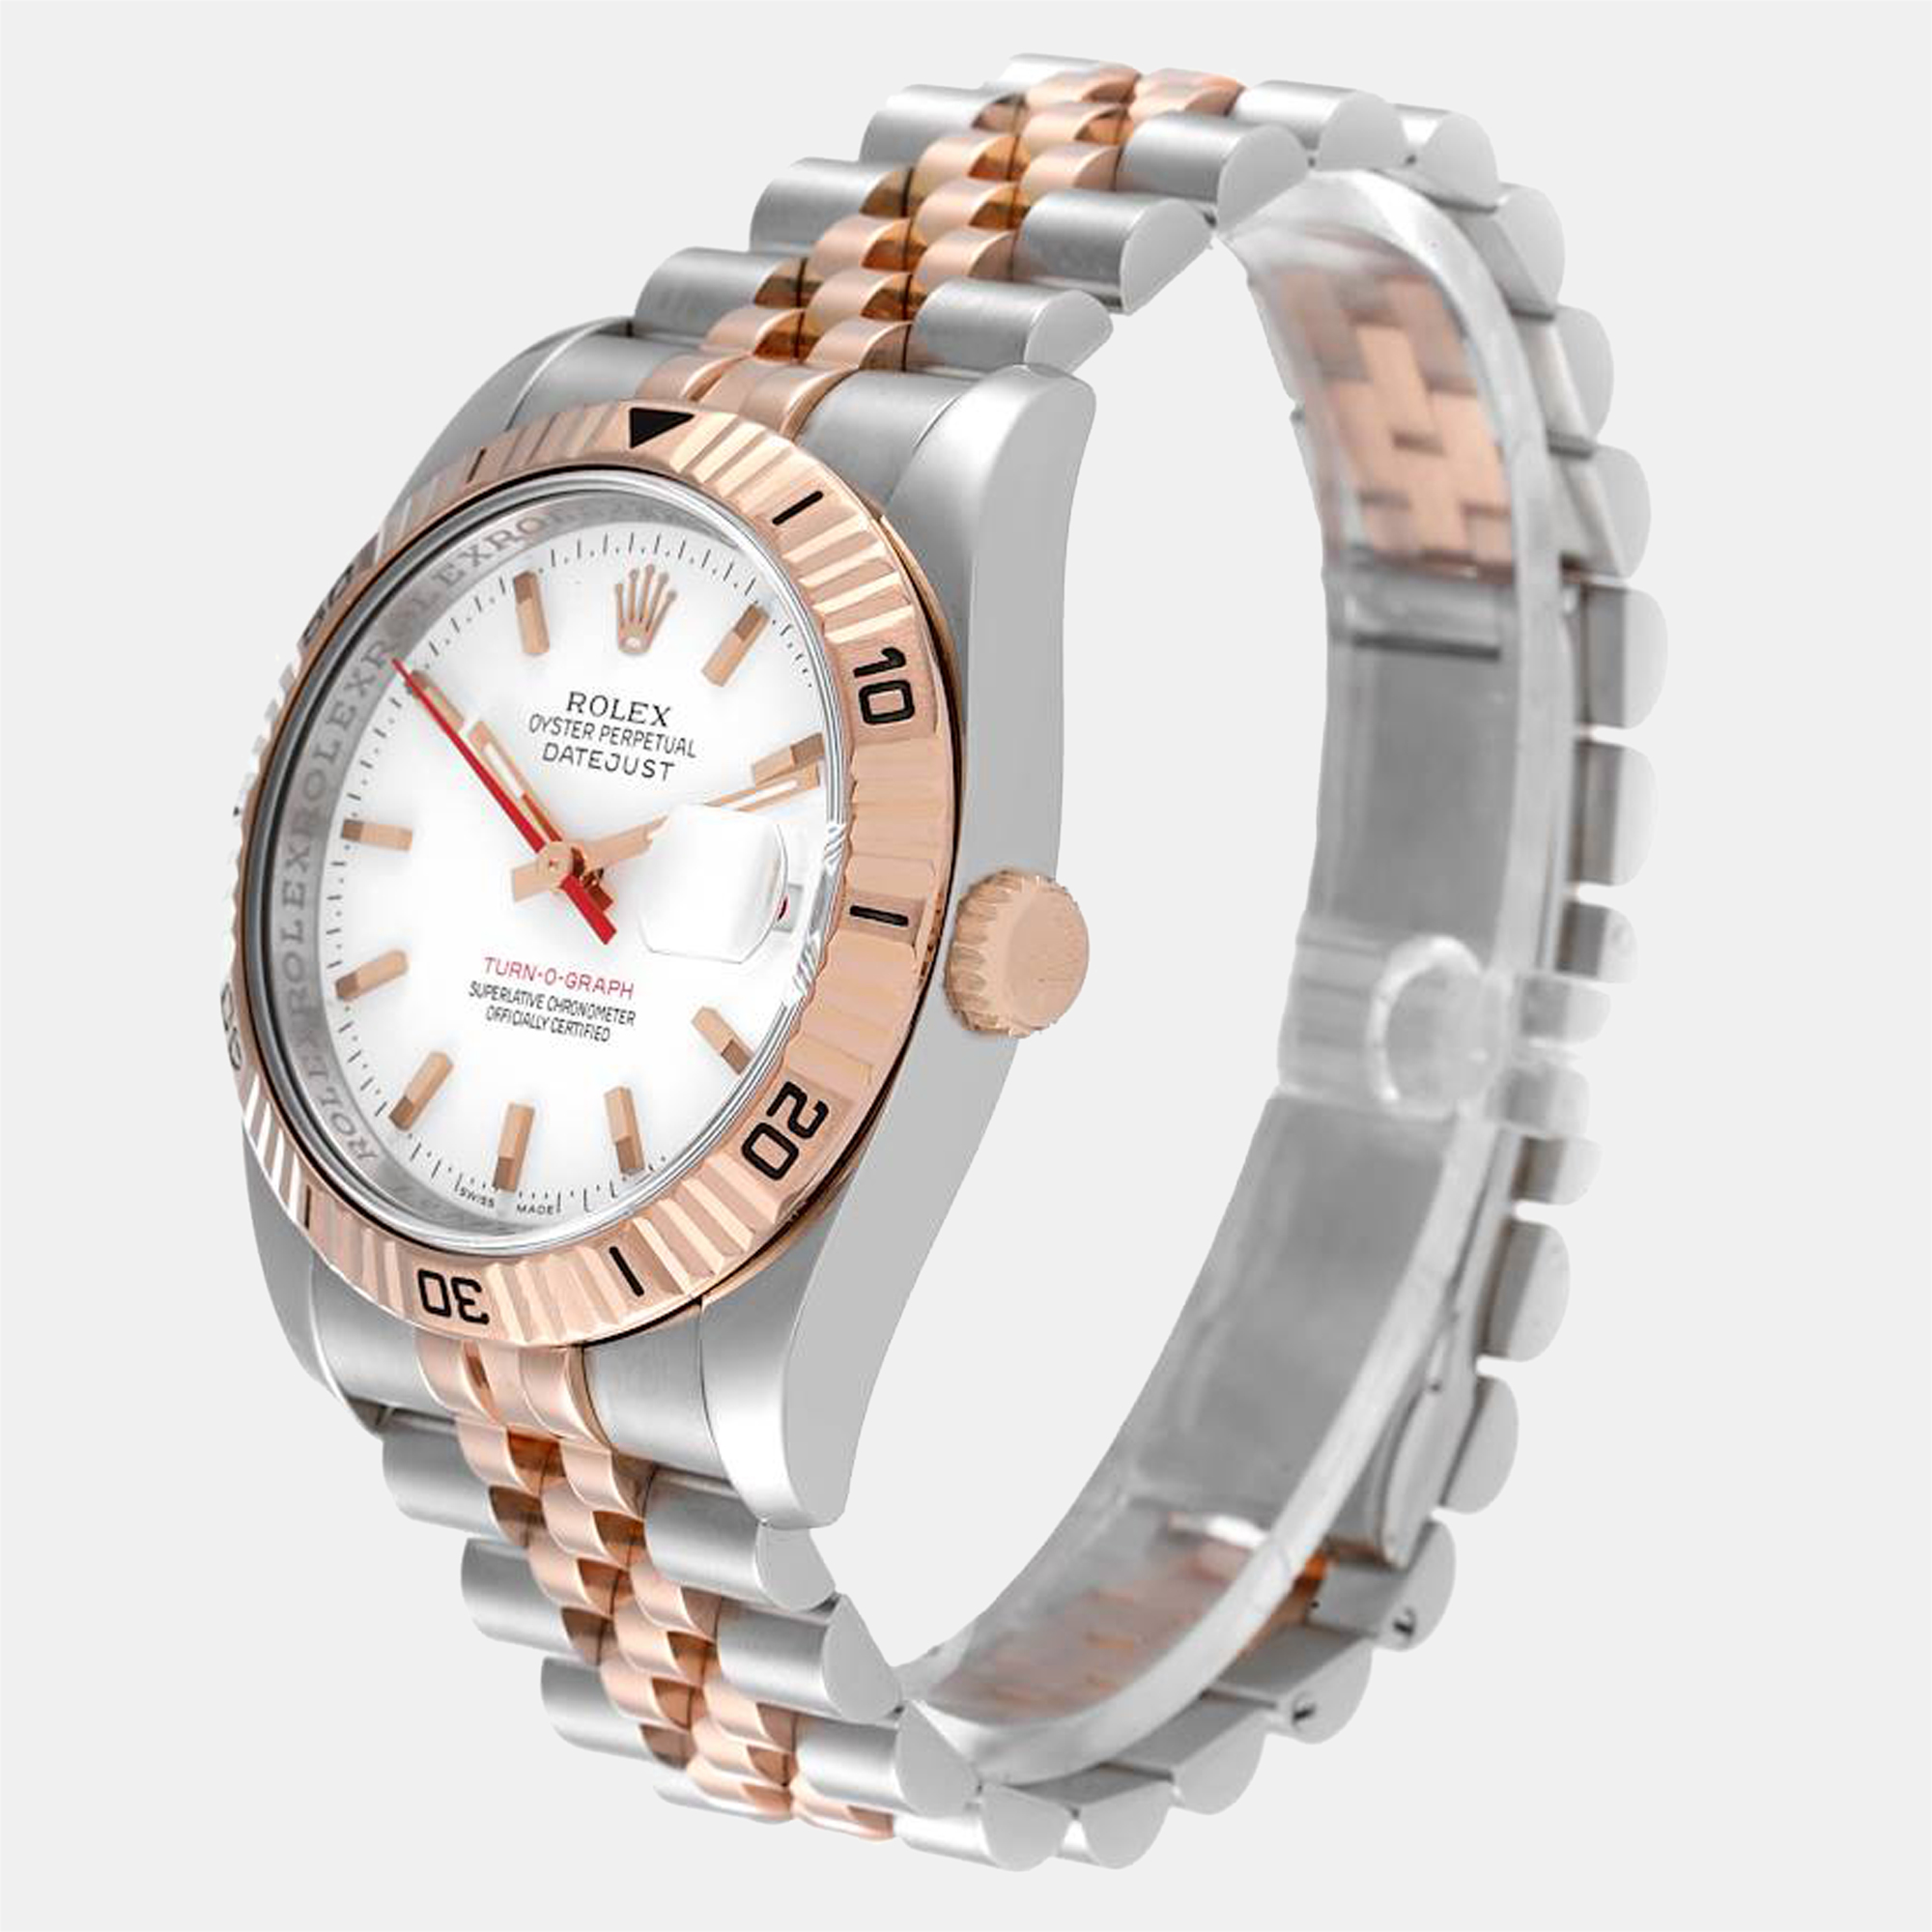 Rolex White 18K Rose Gold And Stainless Steel Datejust Turnograph 116261 Automatic Men's Wristwatch 36 Mm